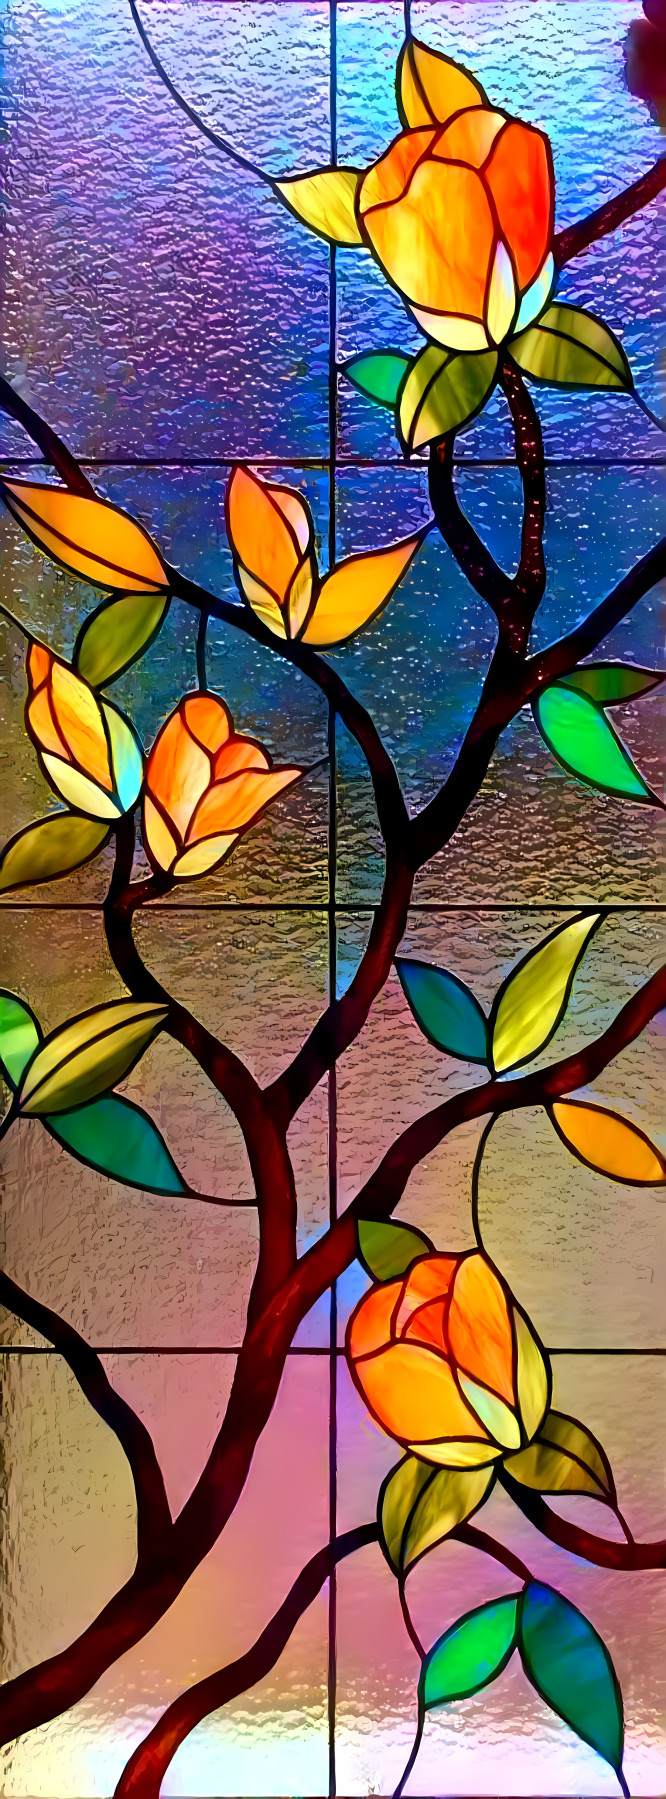 Stained glass with blue light